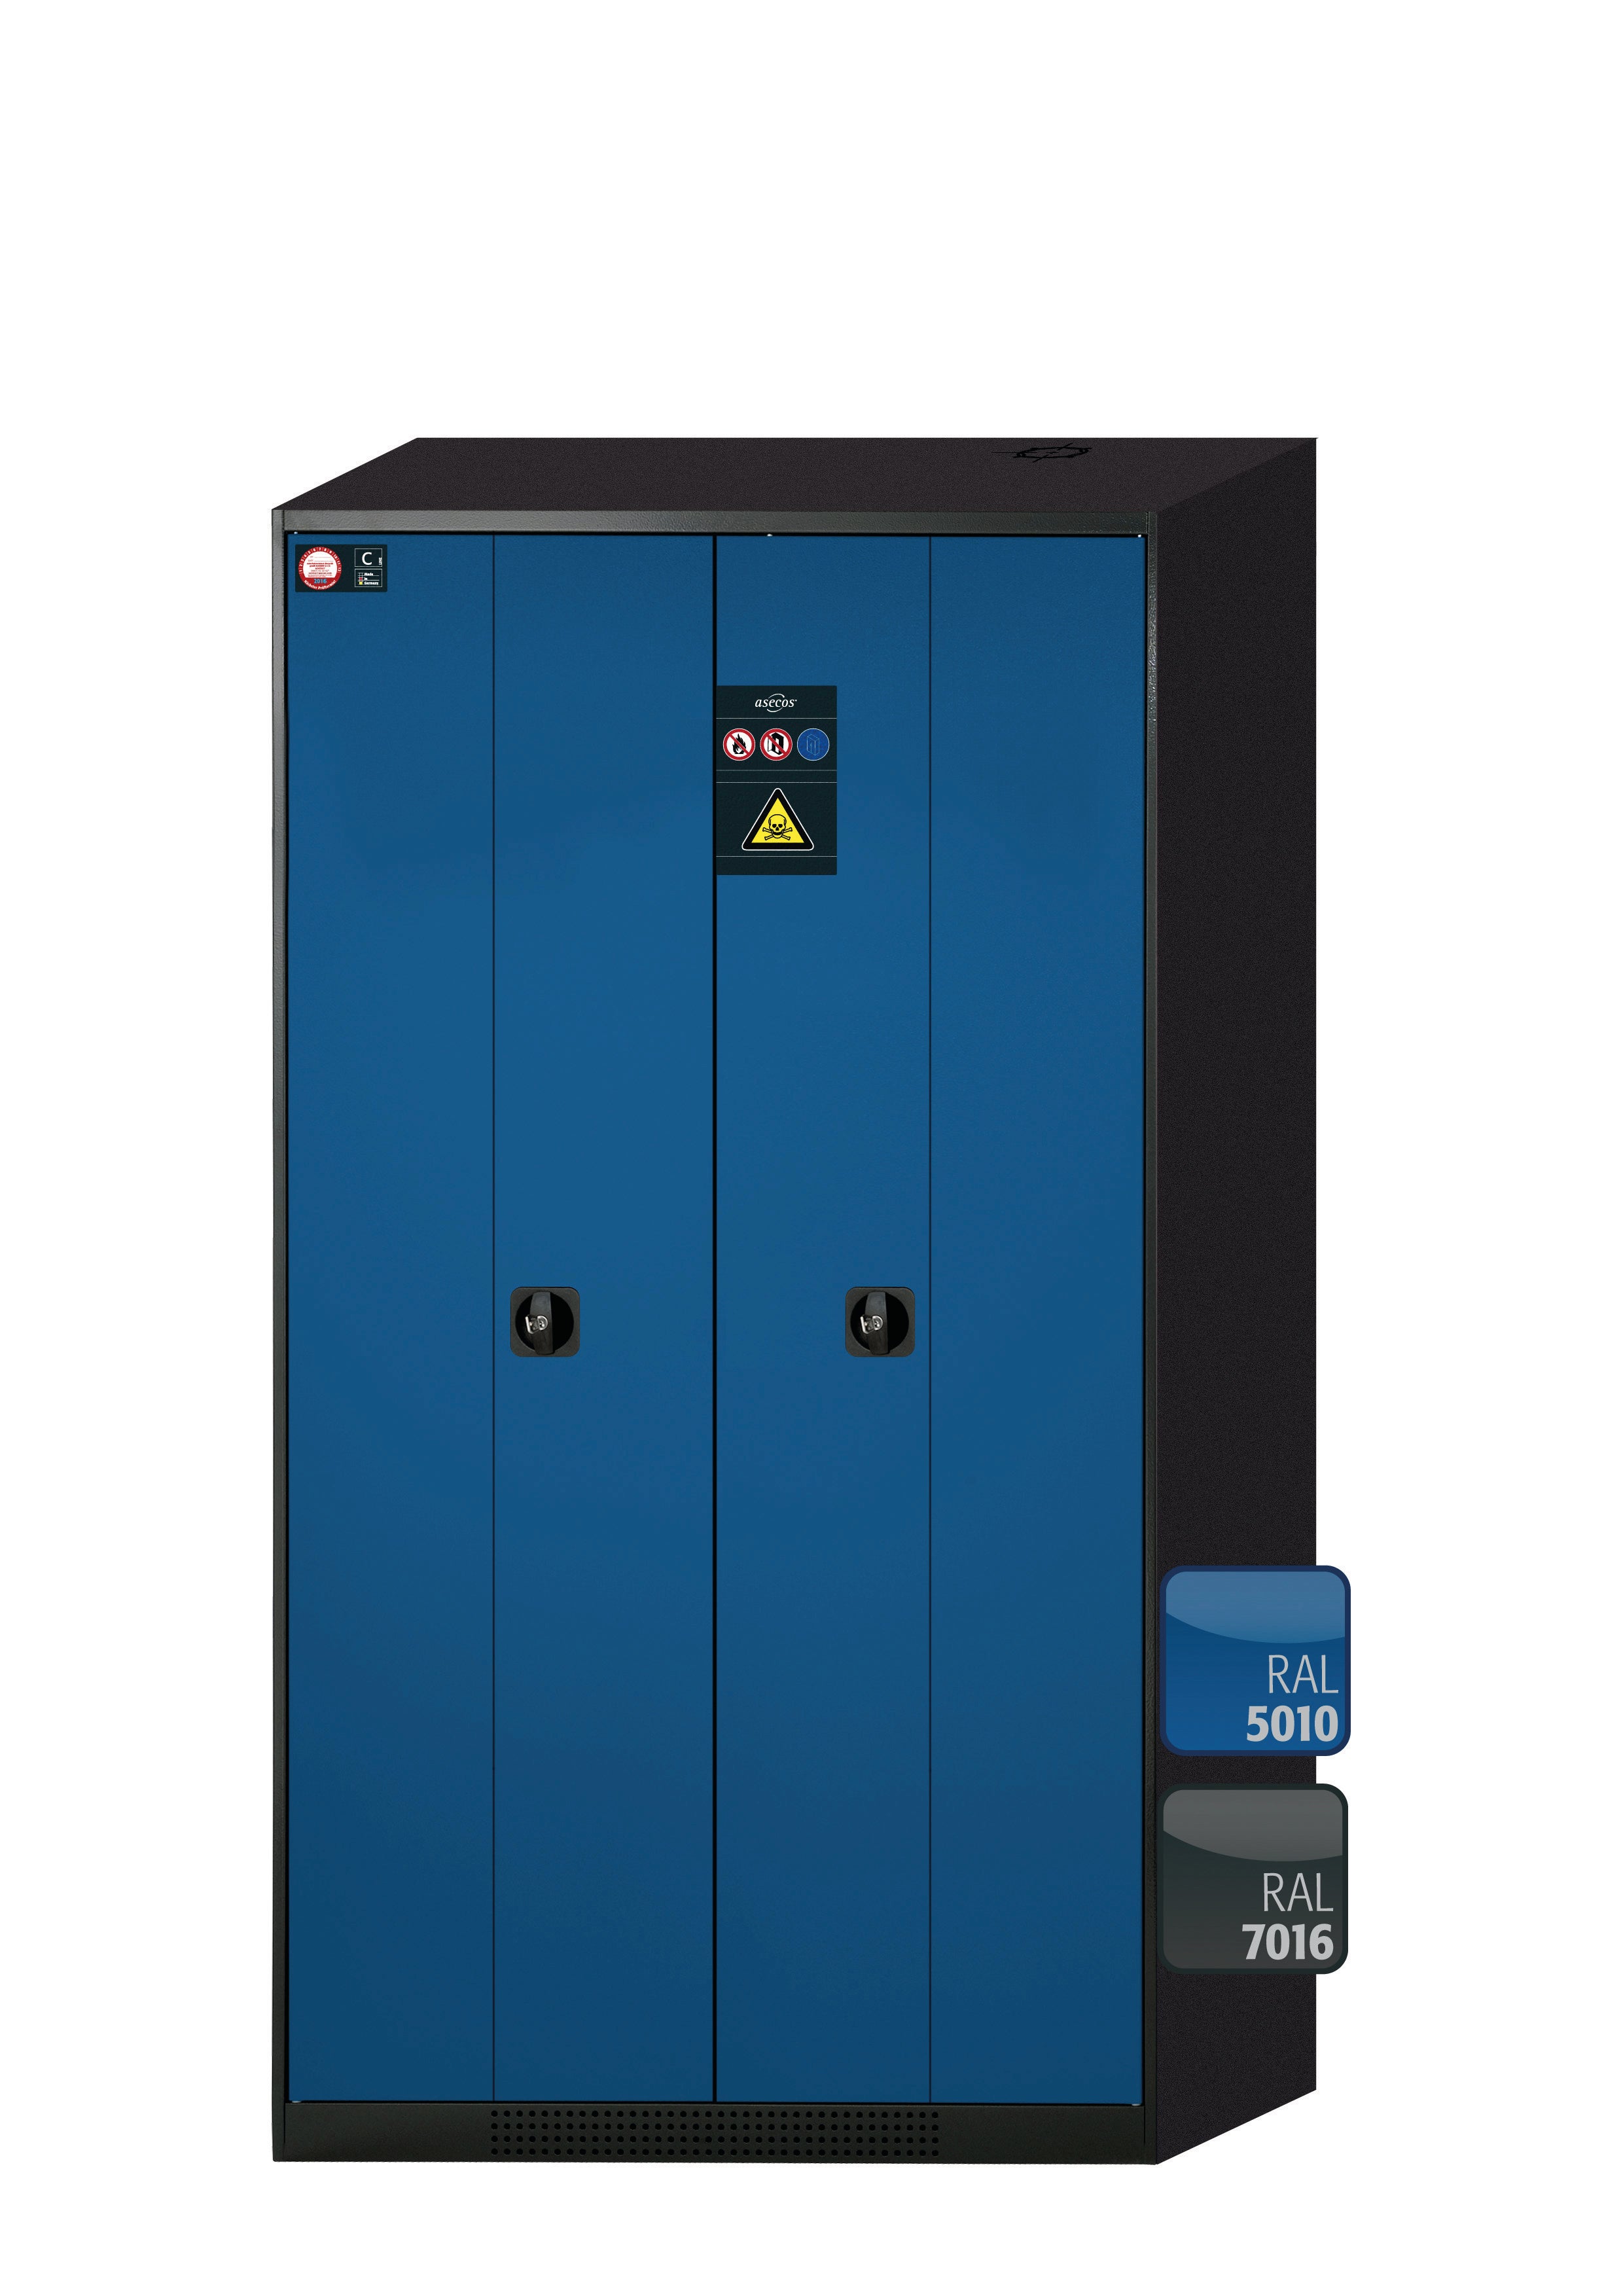 Chemical cabinet CS-PHOENIX model CS.195.105.FD in gentian blue RAL 5010 with 4x AbZ pull-out shelves (sheet steel/polypropylene)